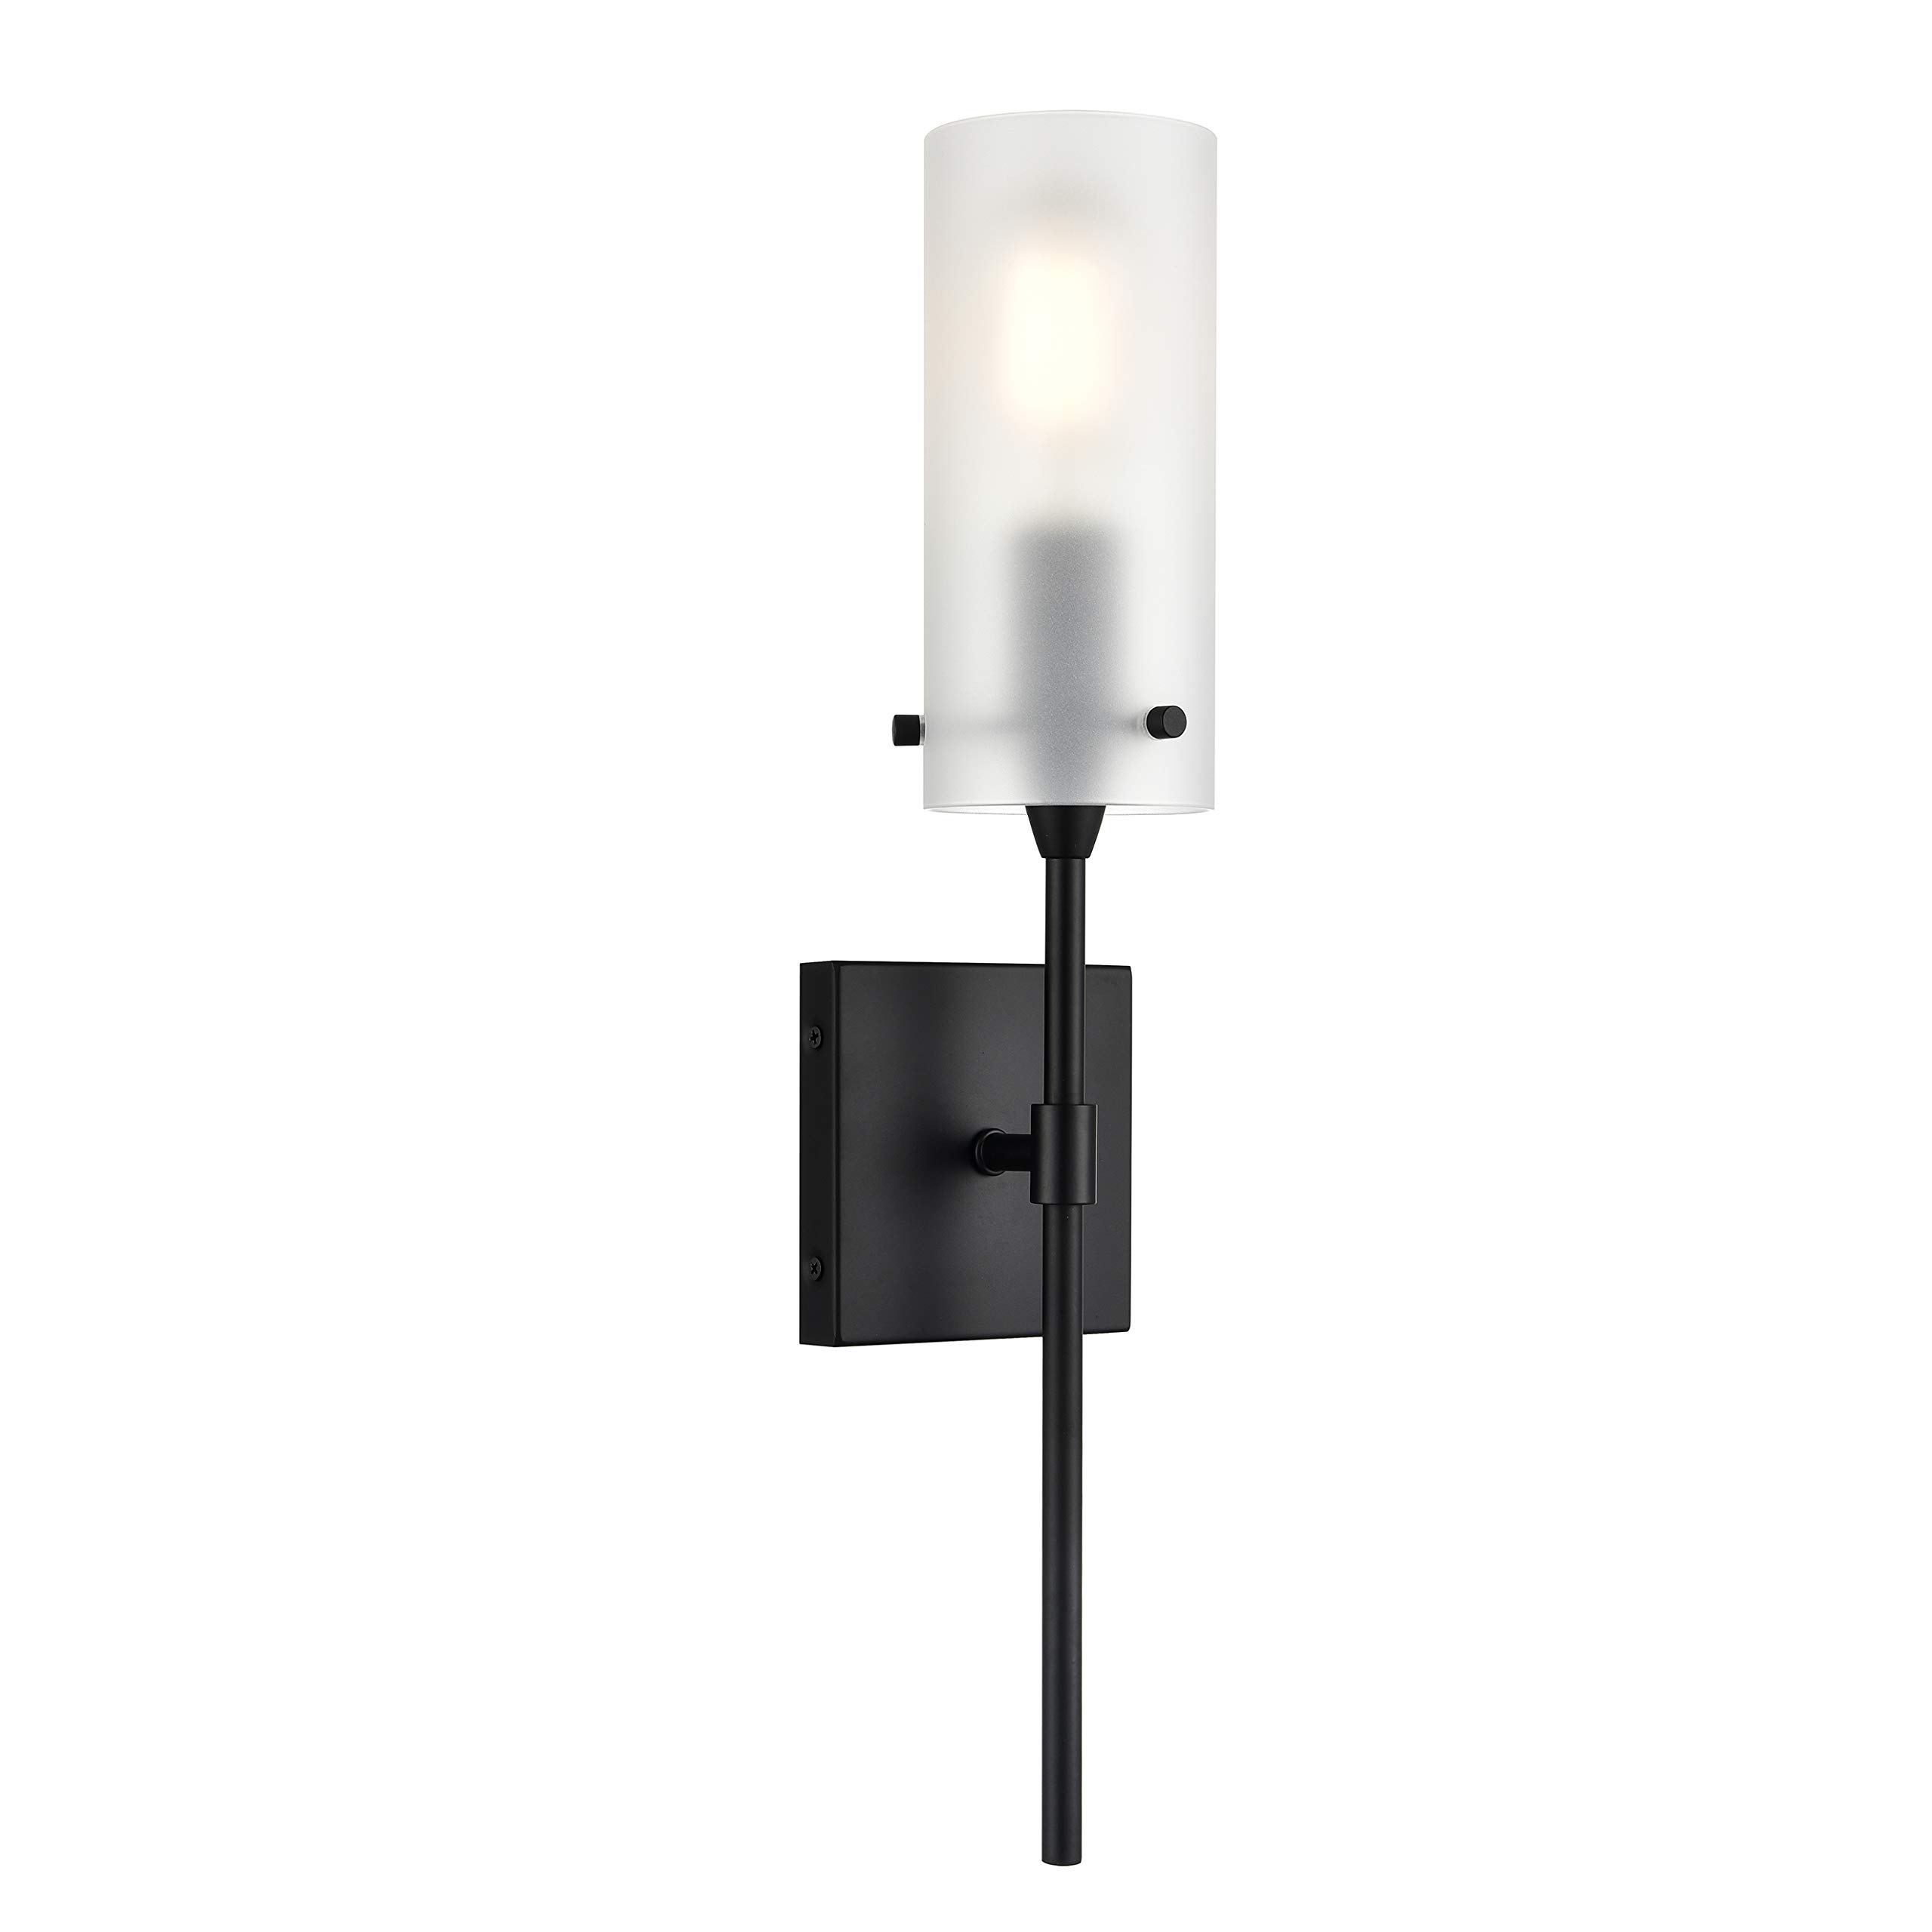 Linea di Liara Effimero Black Wall Sconce Lighting - Bathroom Light Fixture - Modern Indoor Interior Bedroom Wall Sconces with Frosted Glass Shade